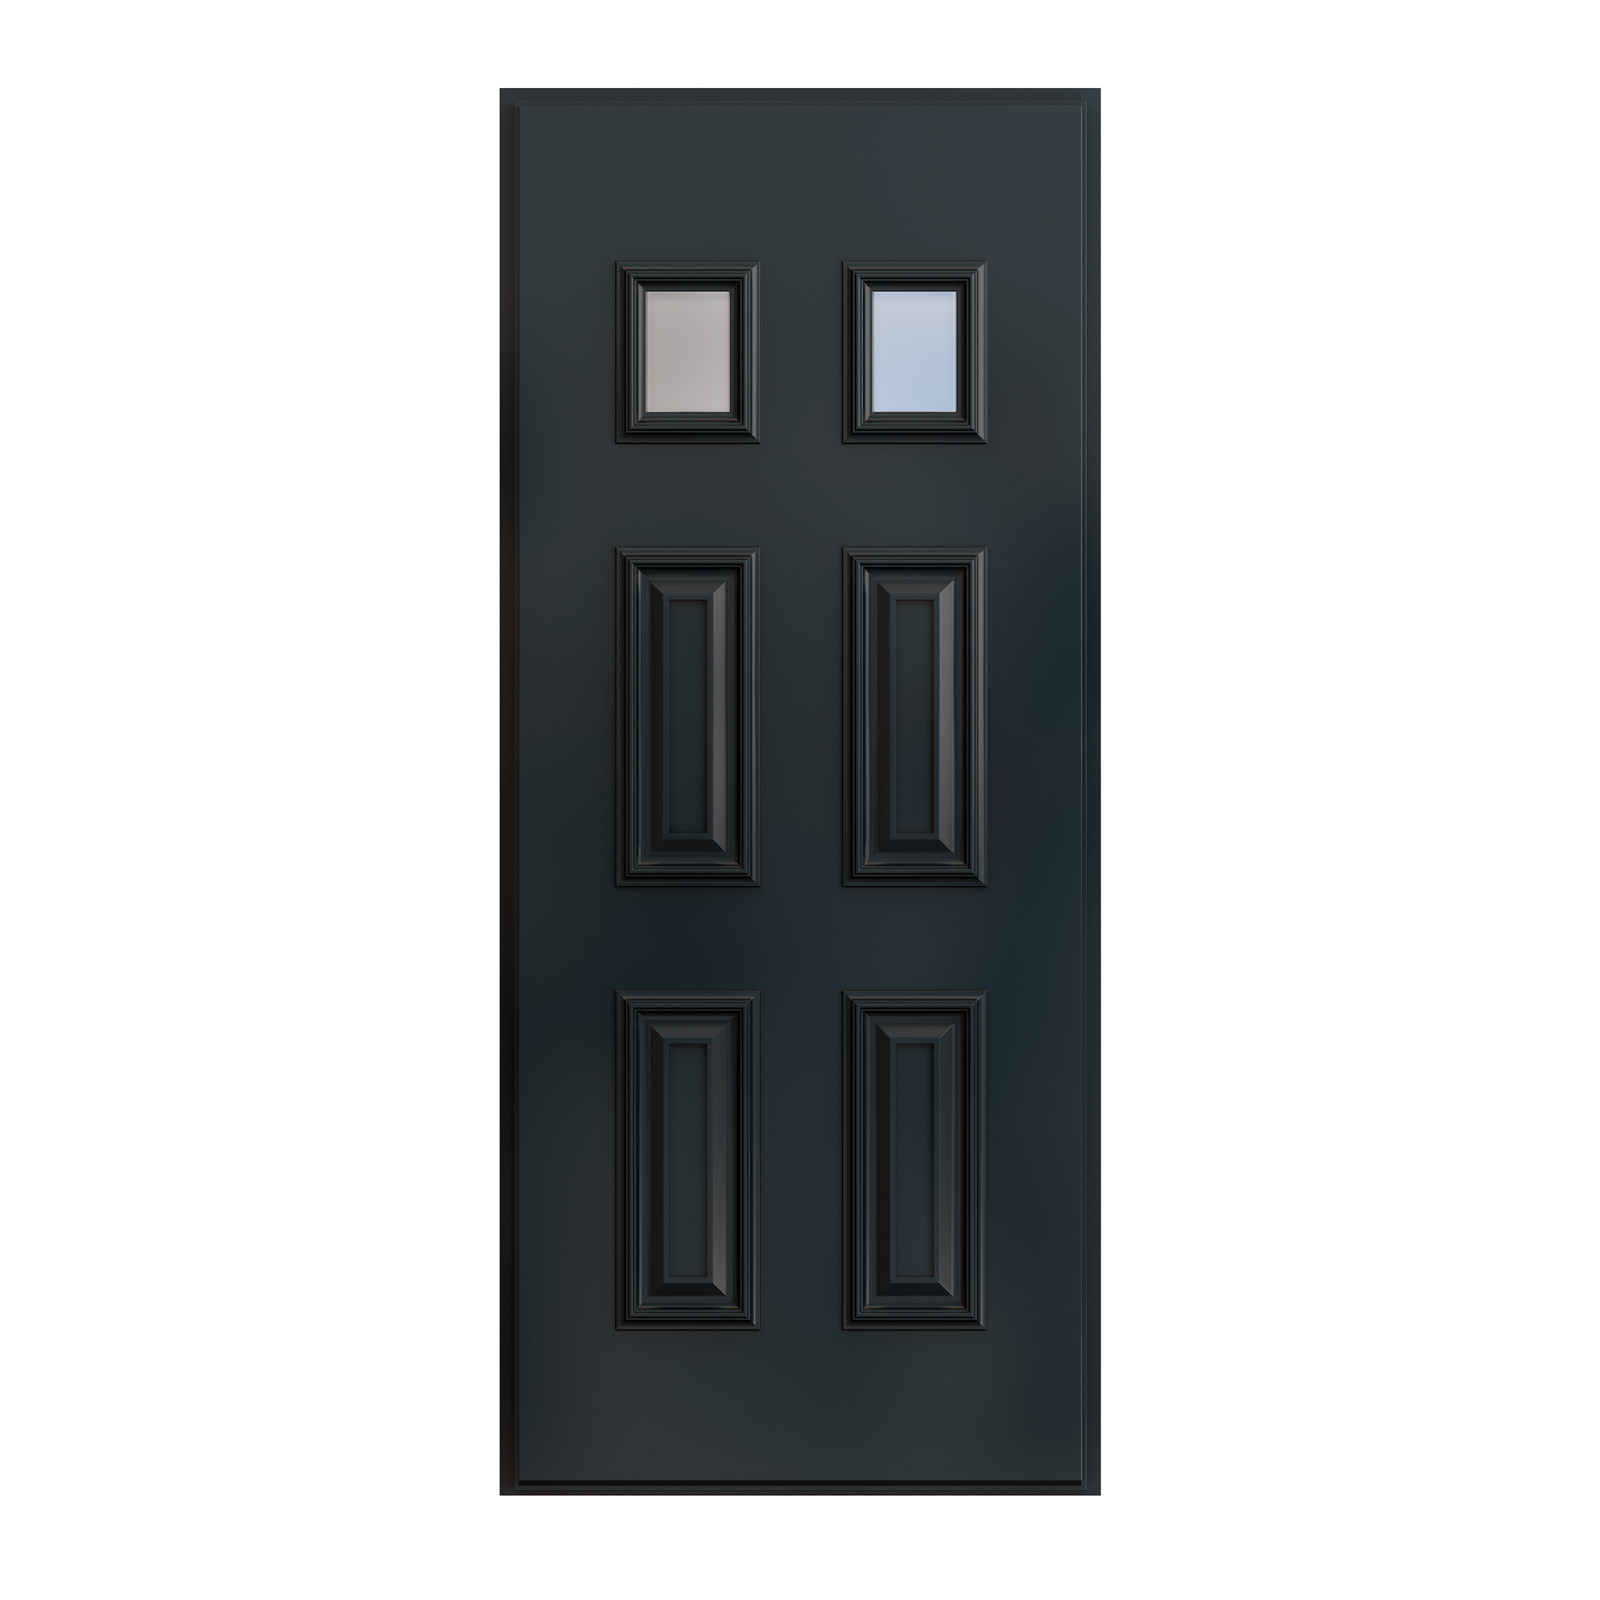 Alitherm 400 Door with PT0001P panel